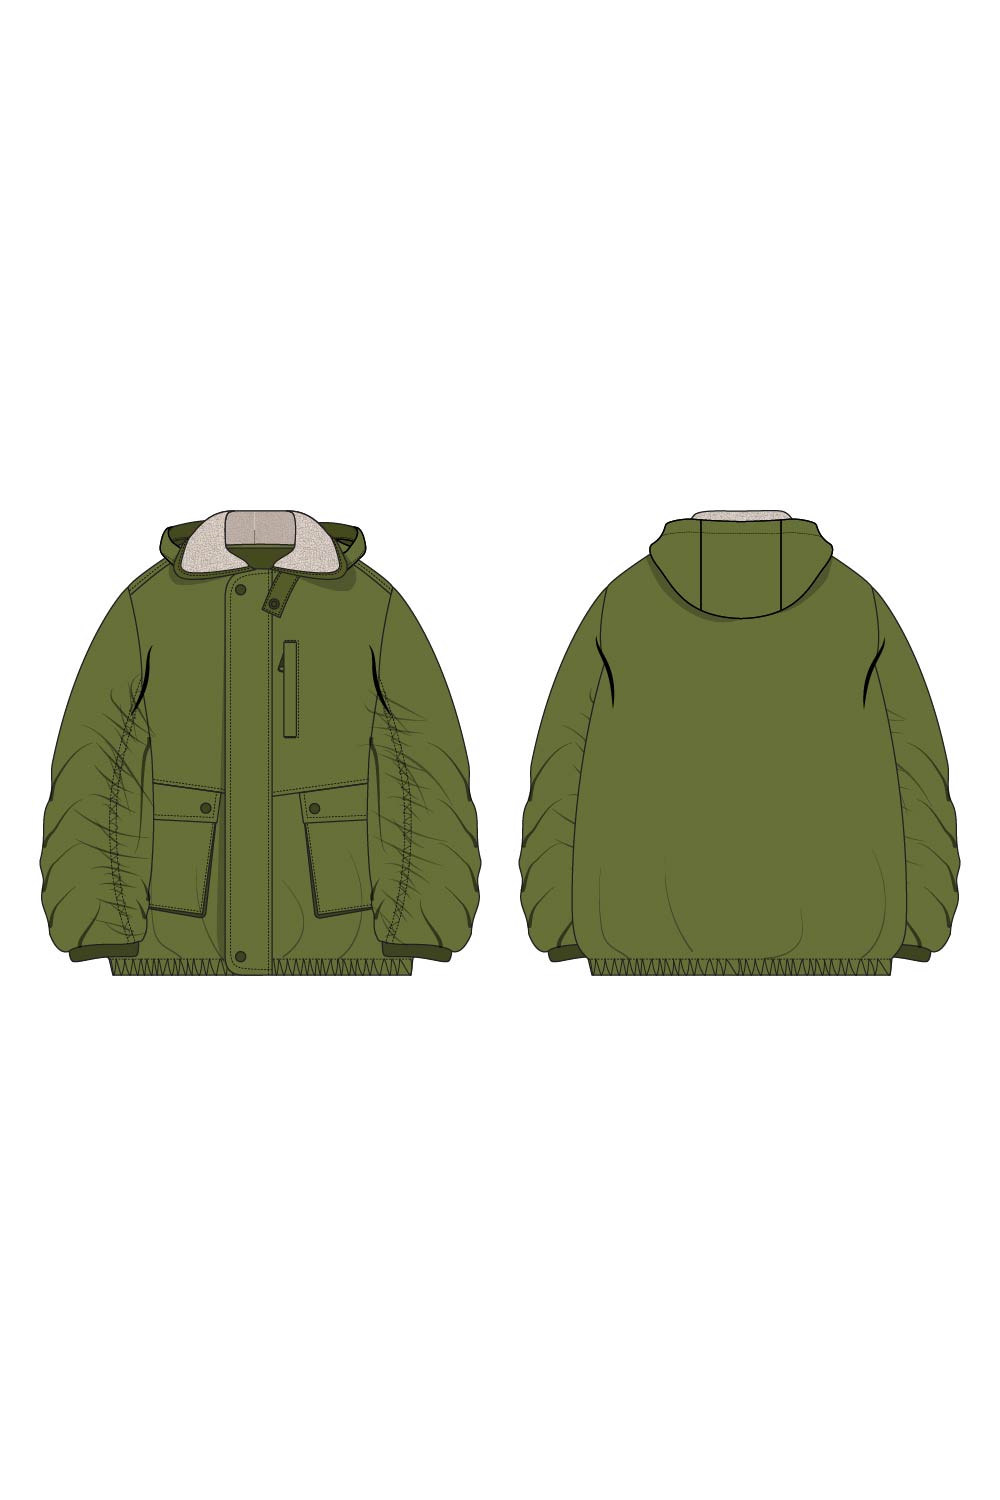 GATHERED SLEEVE JACKET WITH SHERPA LINING COLLAR & DETACHABLE HOODIE (MEN'S) pinterest preview image.